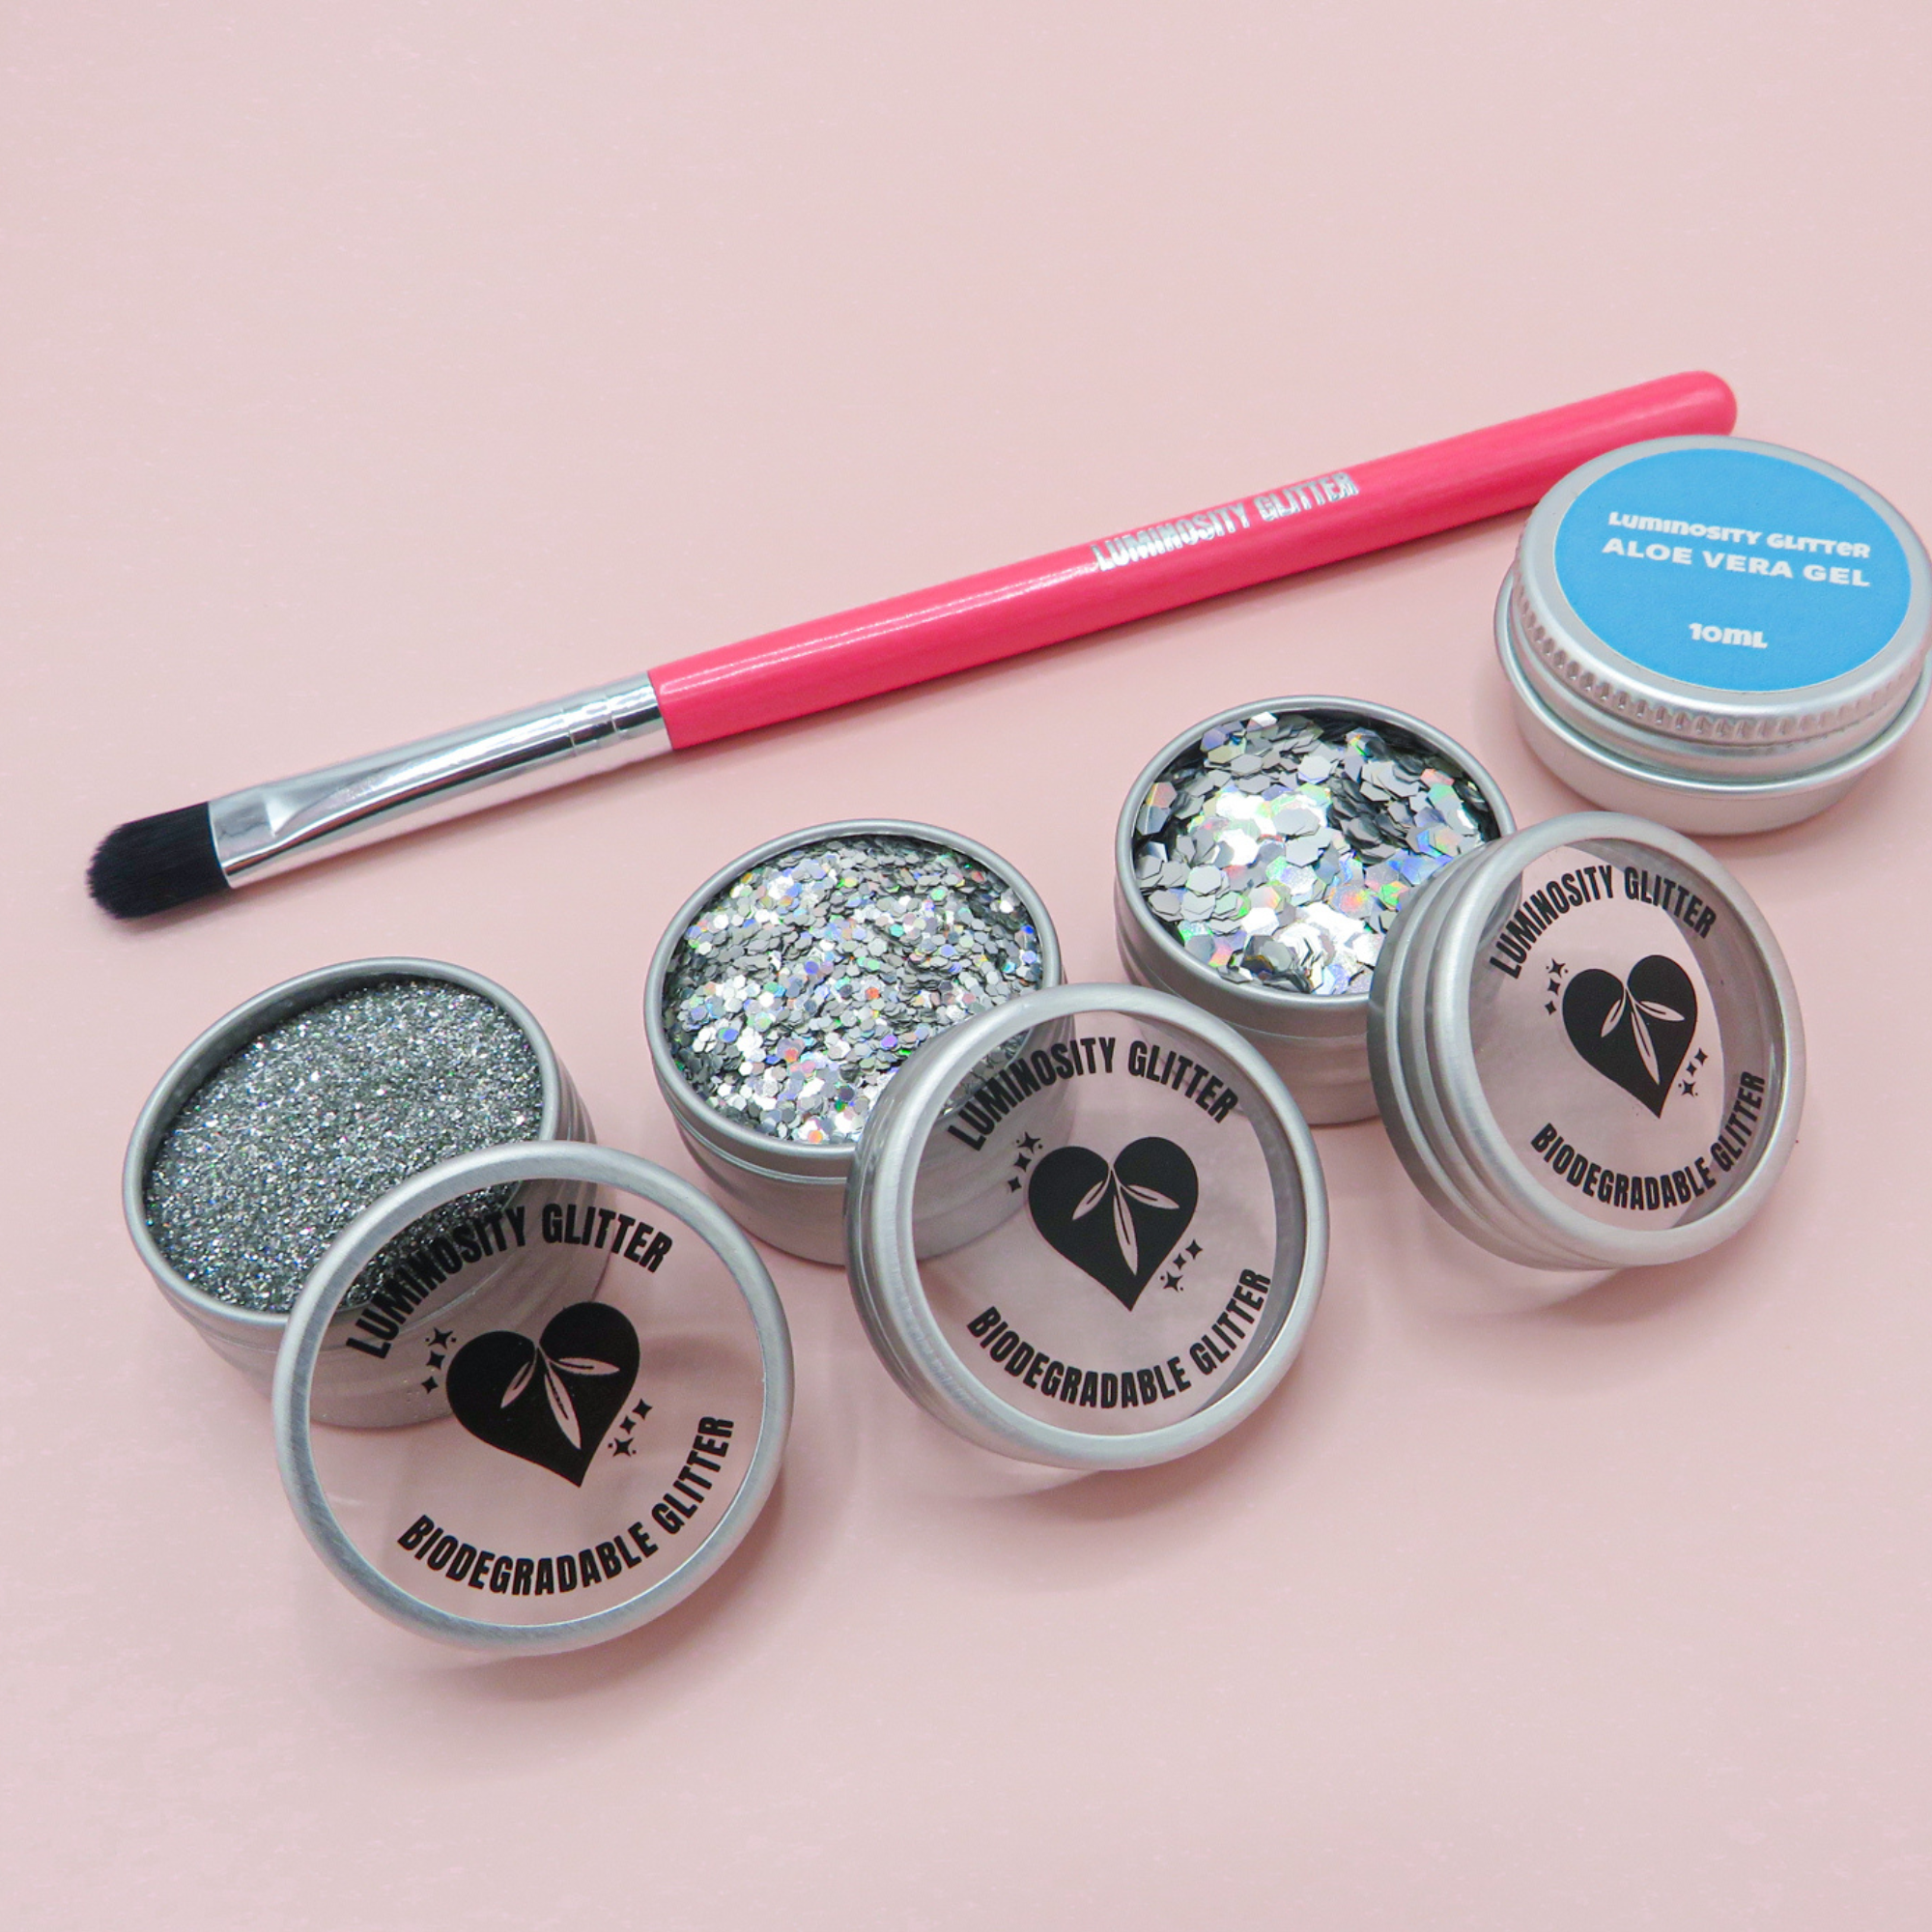 Holographic trio of biodegradable glitter by Luminosity Glitter for Christmas